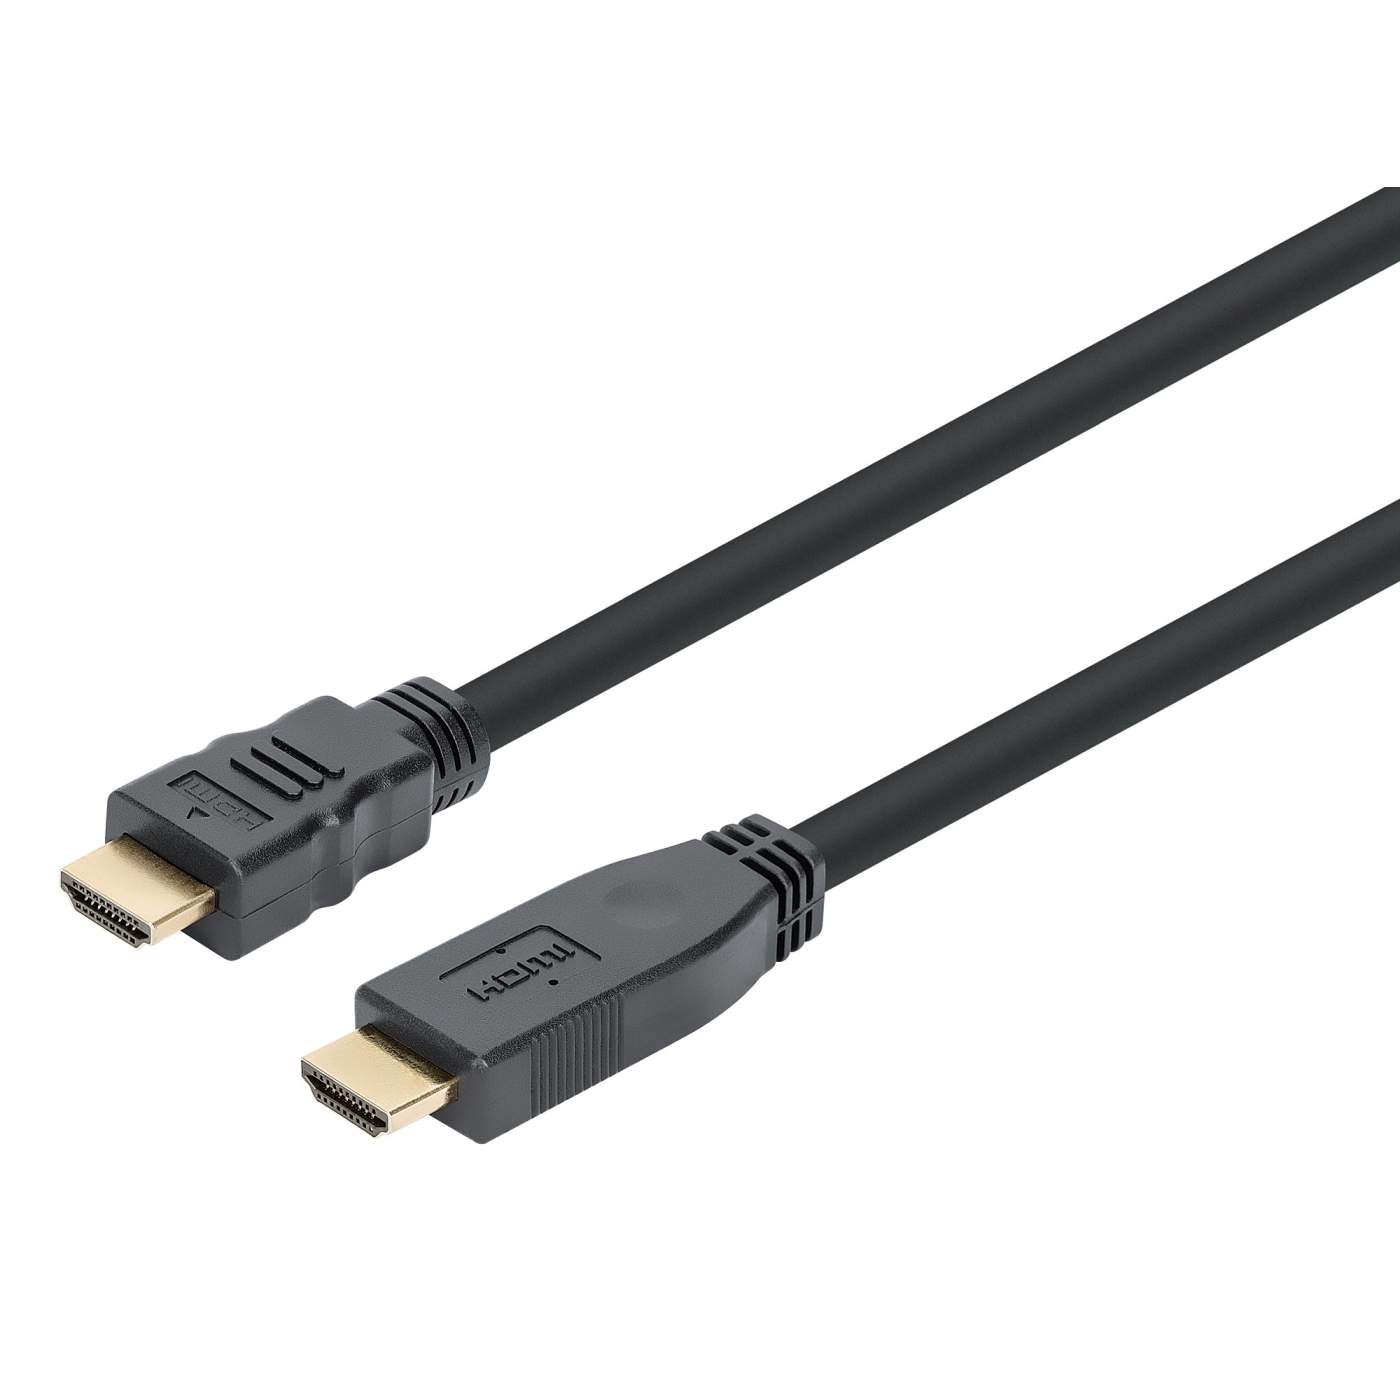 Pearstone High-Speed HDMI Cable with Ethernet (Black, 6')